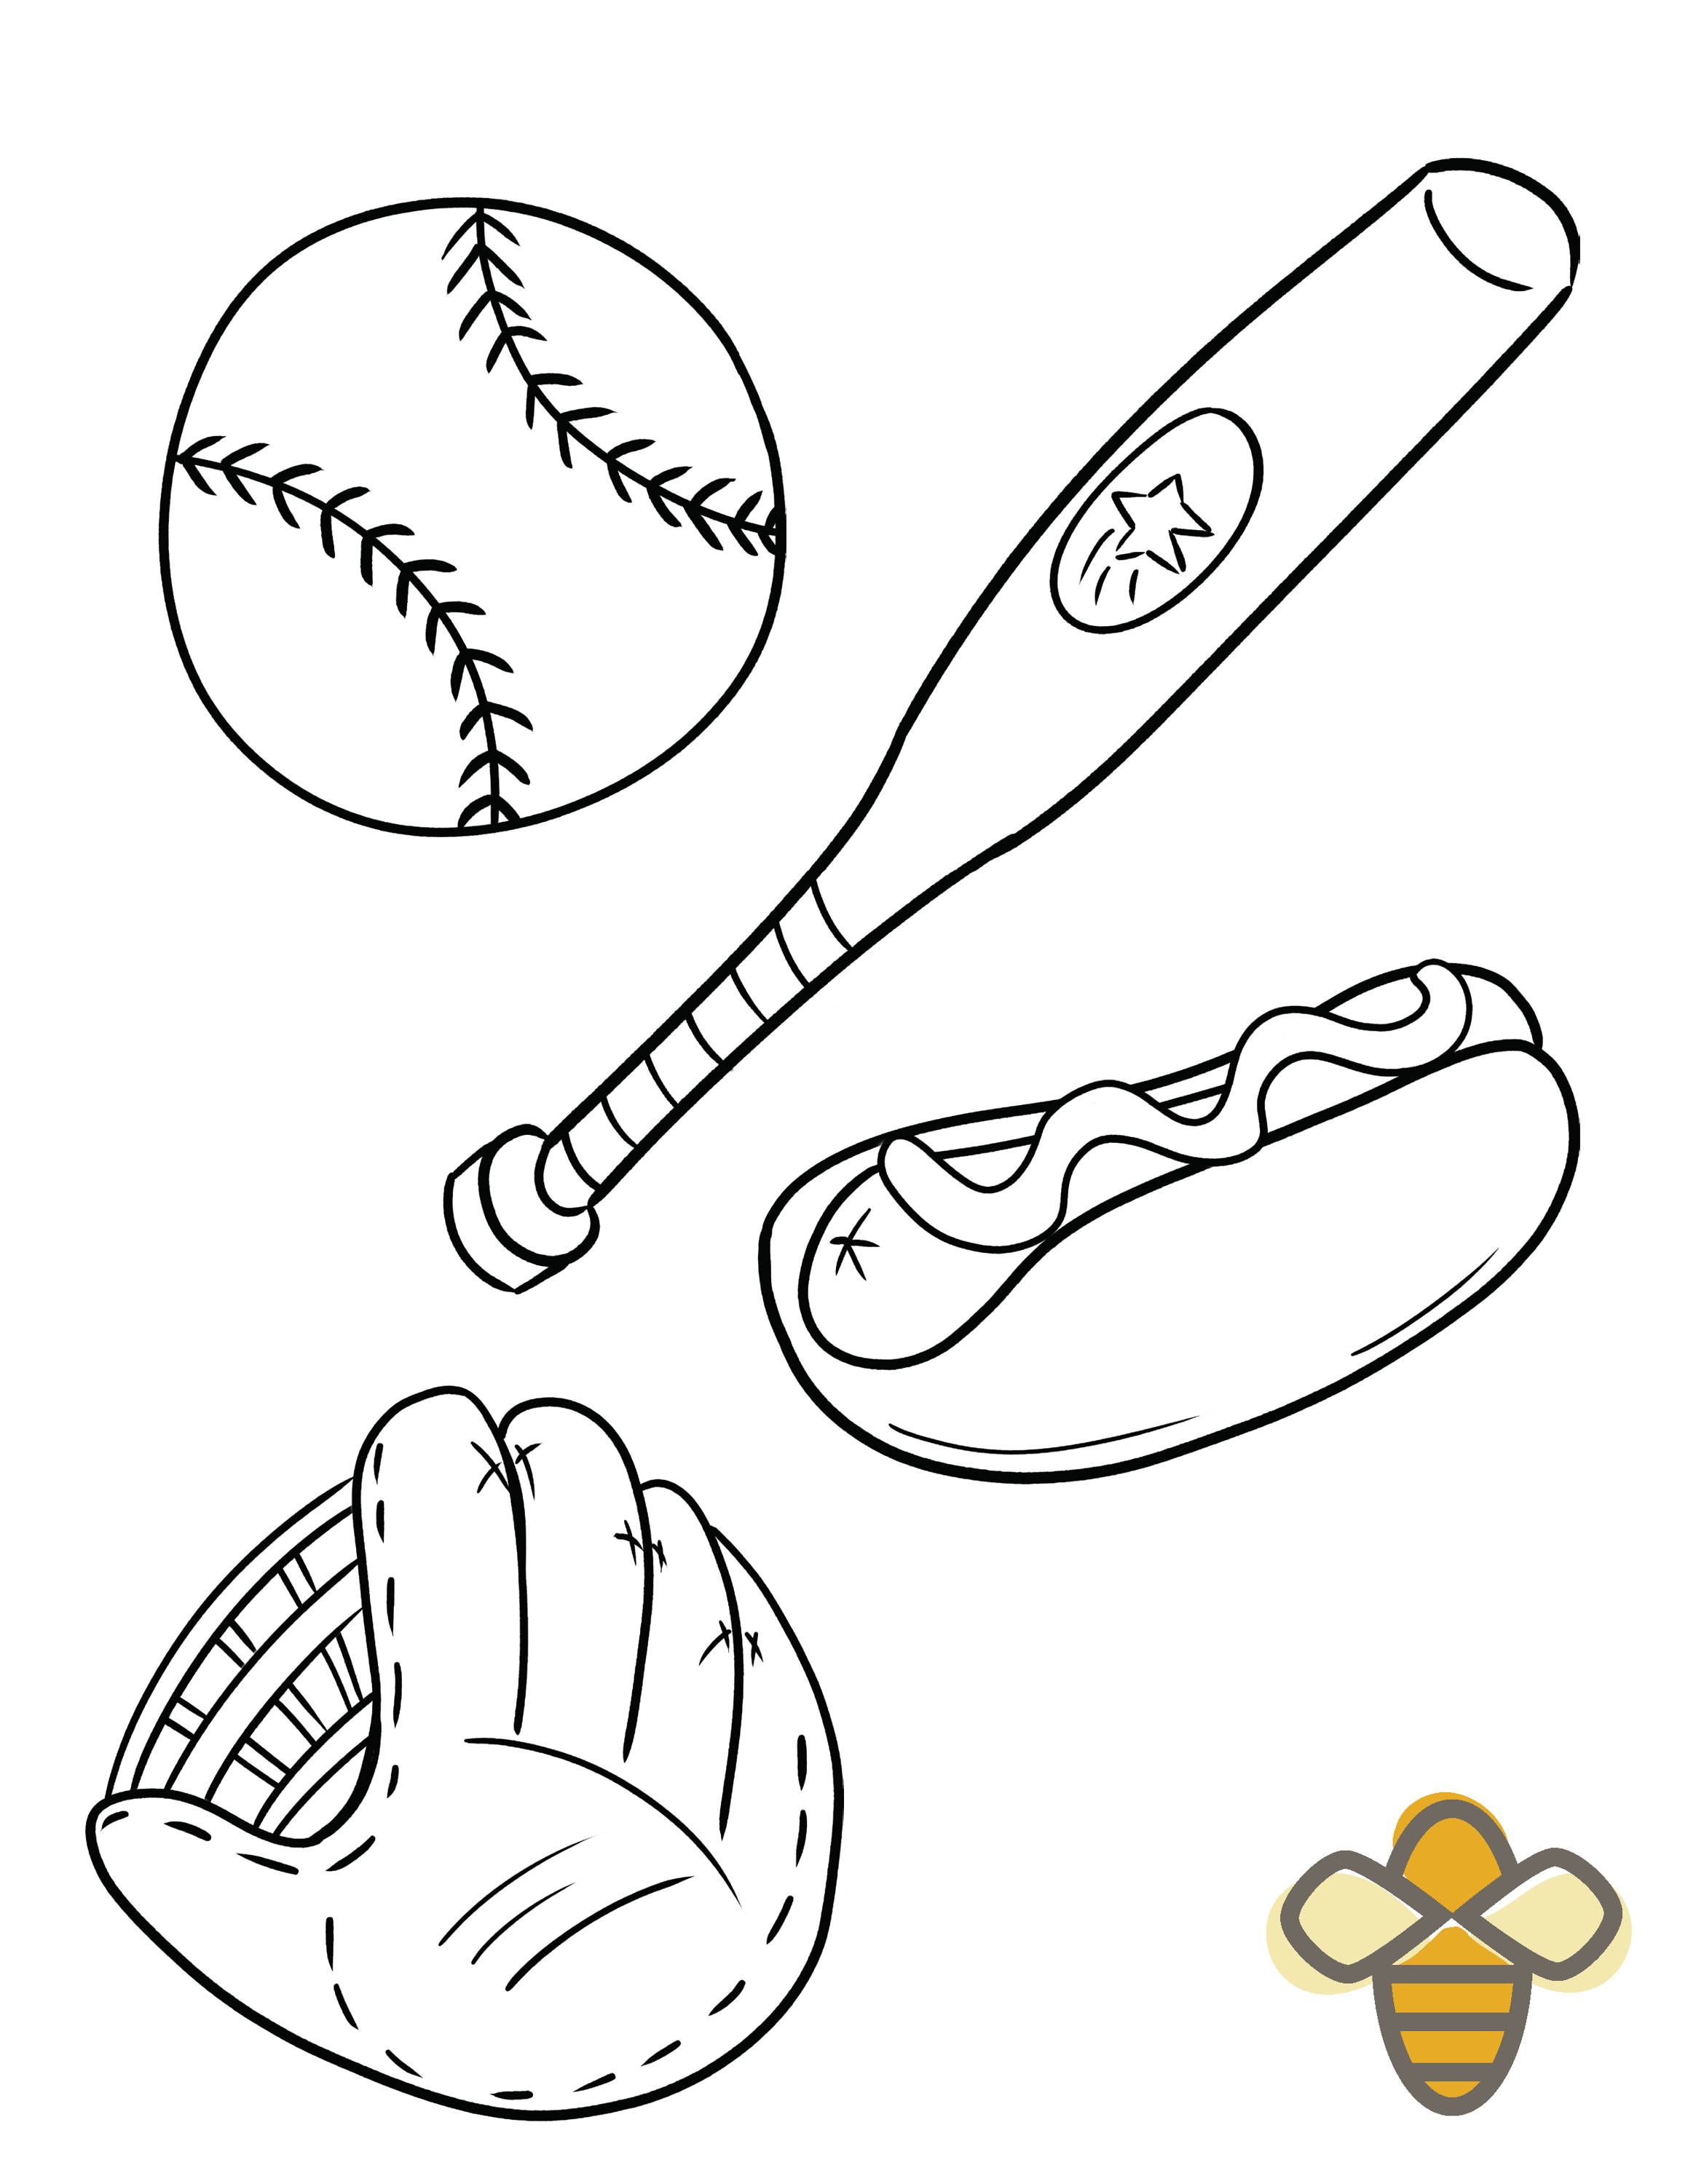 Free printable softball coloring pages pdf for kids